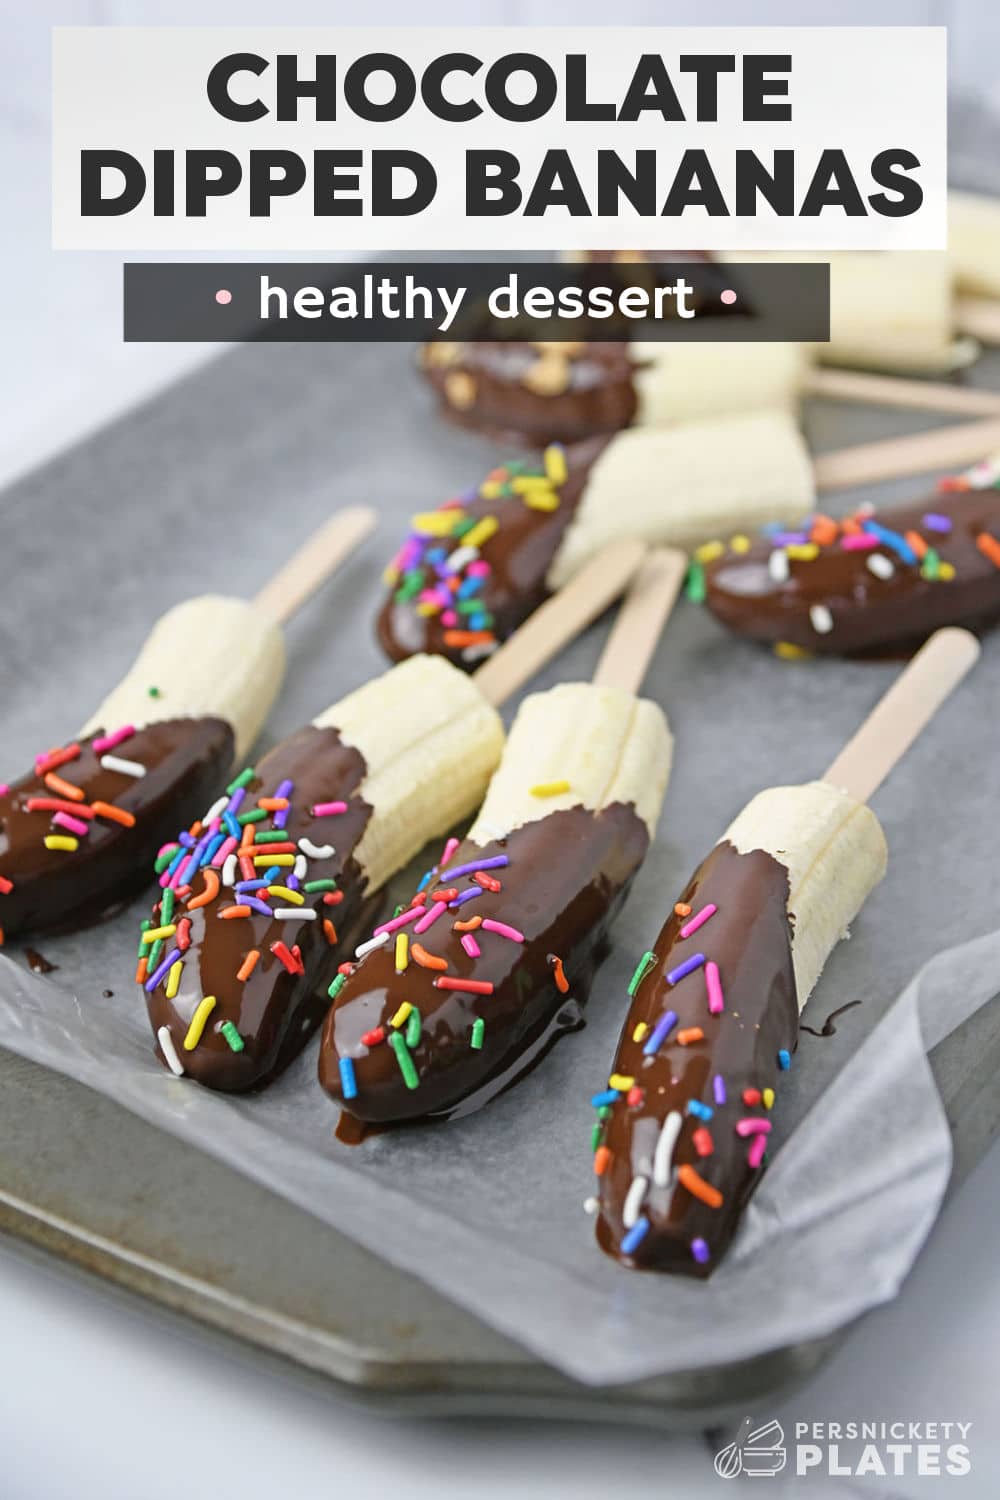 Frozen chocolate dipped bananas are as easy to make as they are to eat! Take ripe sweet bananas coat them in melted chocolate and add your favorite toppings. Allow them to freeze and set for a tasty frozen treat both kids and adults love!  | www.persnicketyplates.com